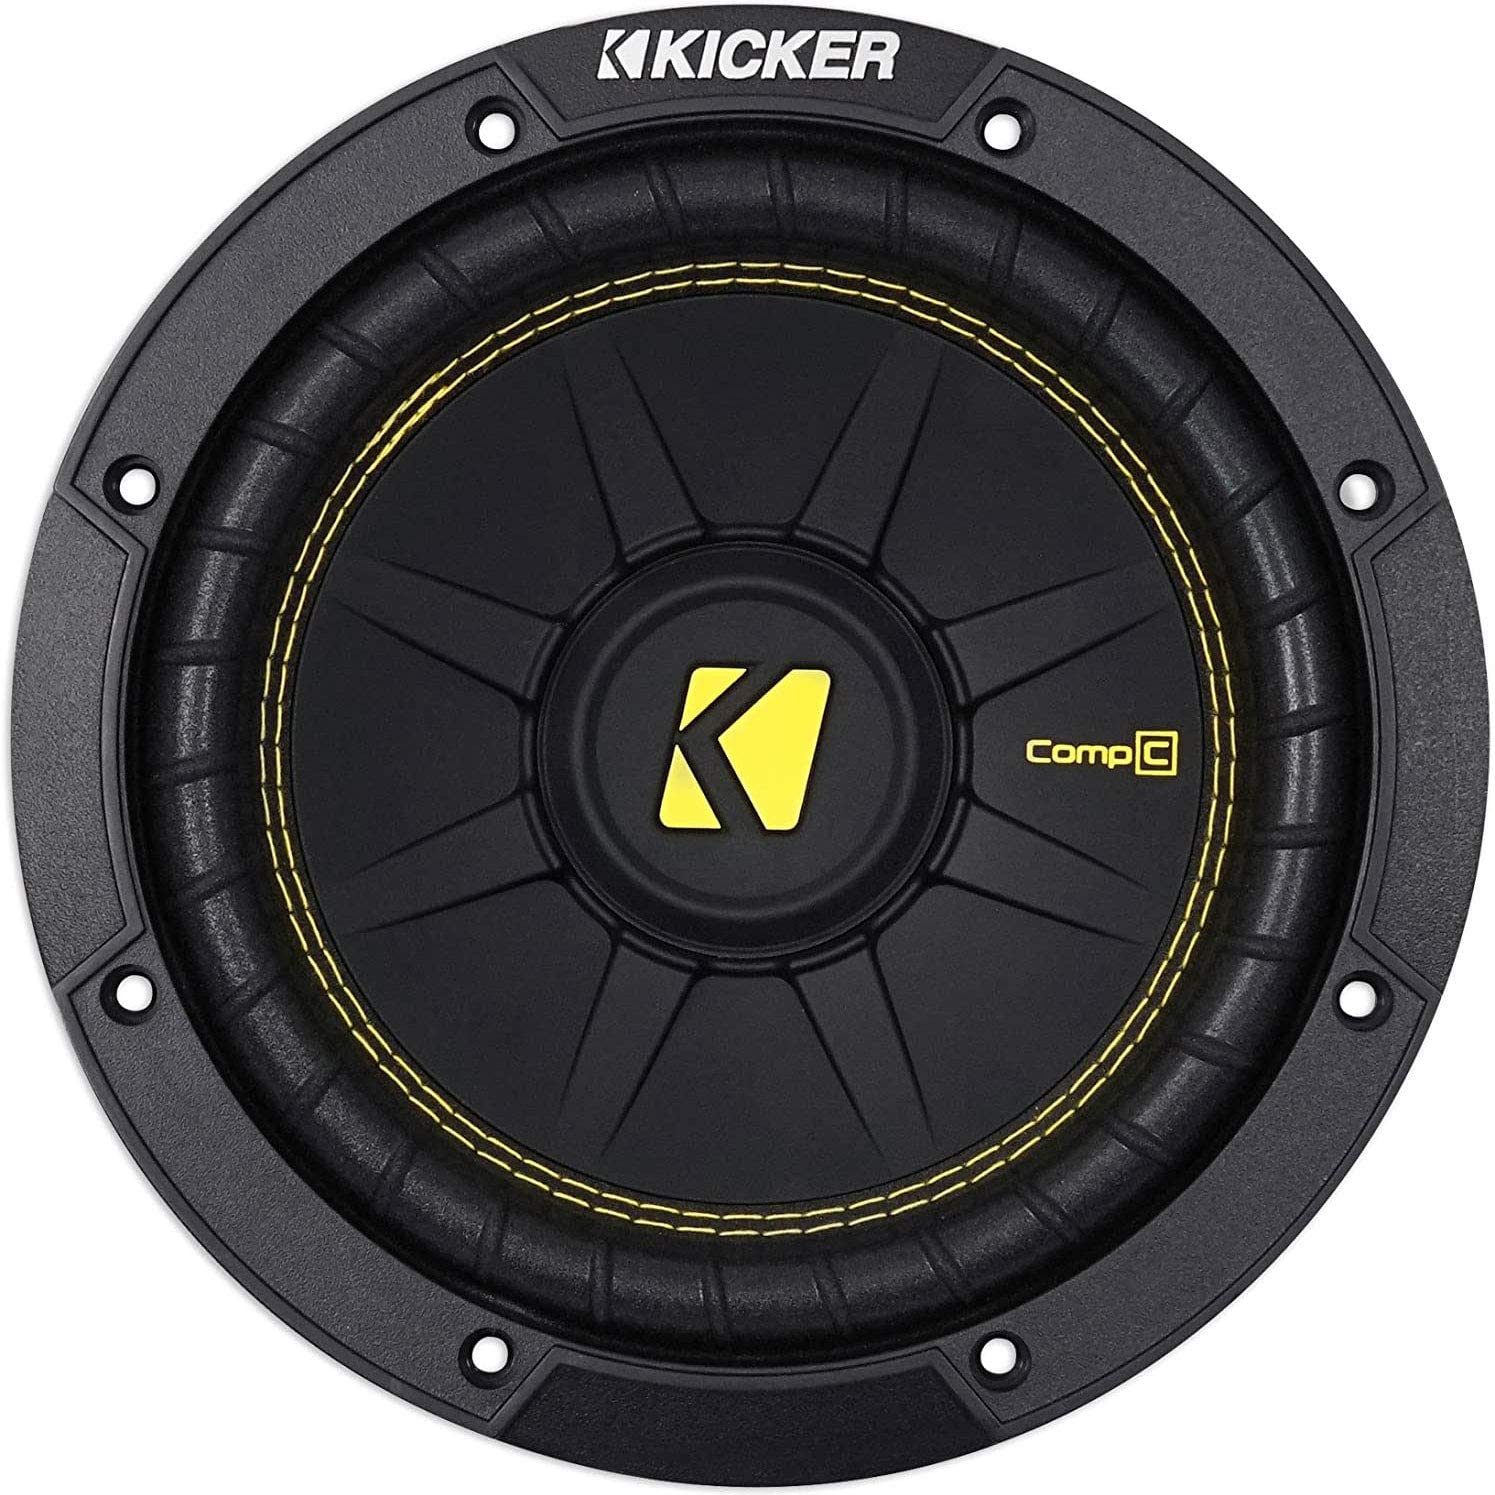 Kicker 44CWCD84 CompC Subwoofer Best 8 Inch Free Air Subwoofer